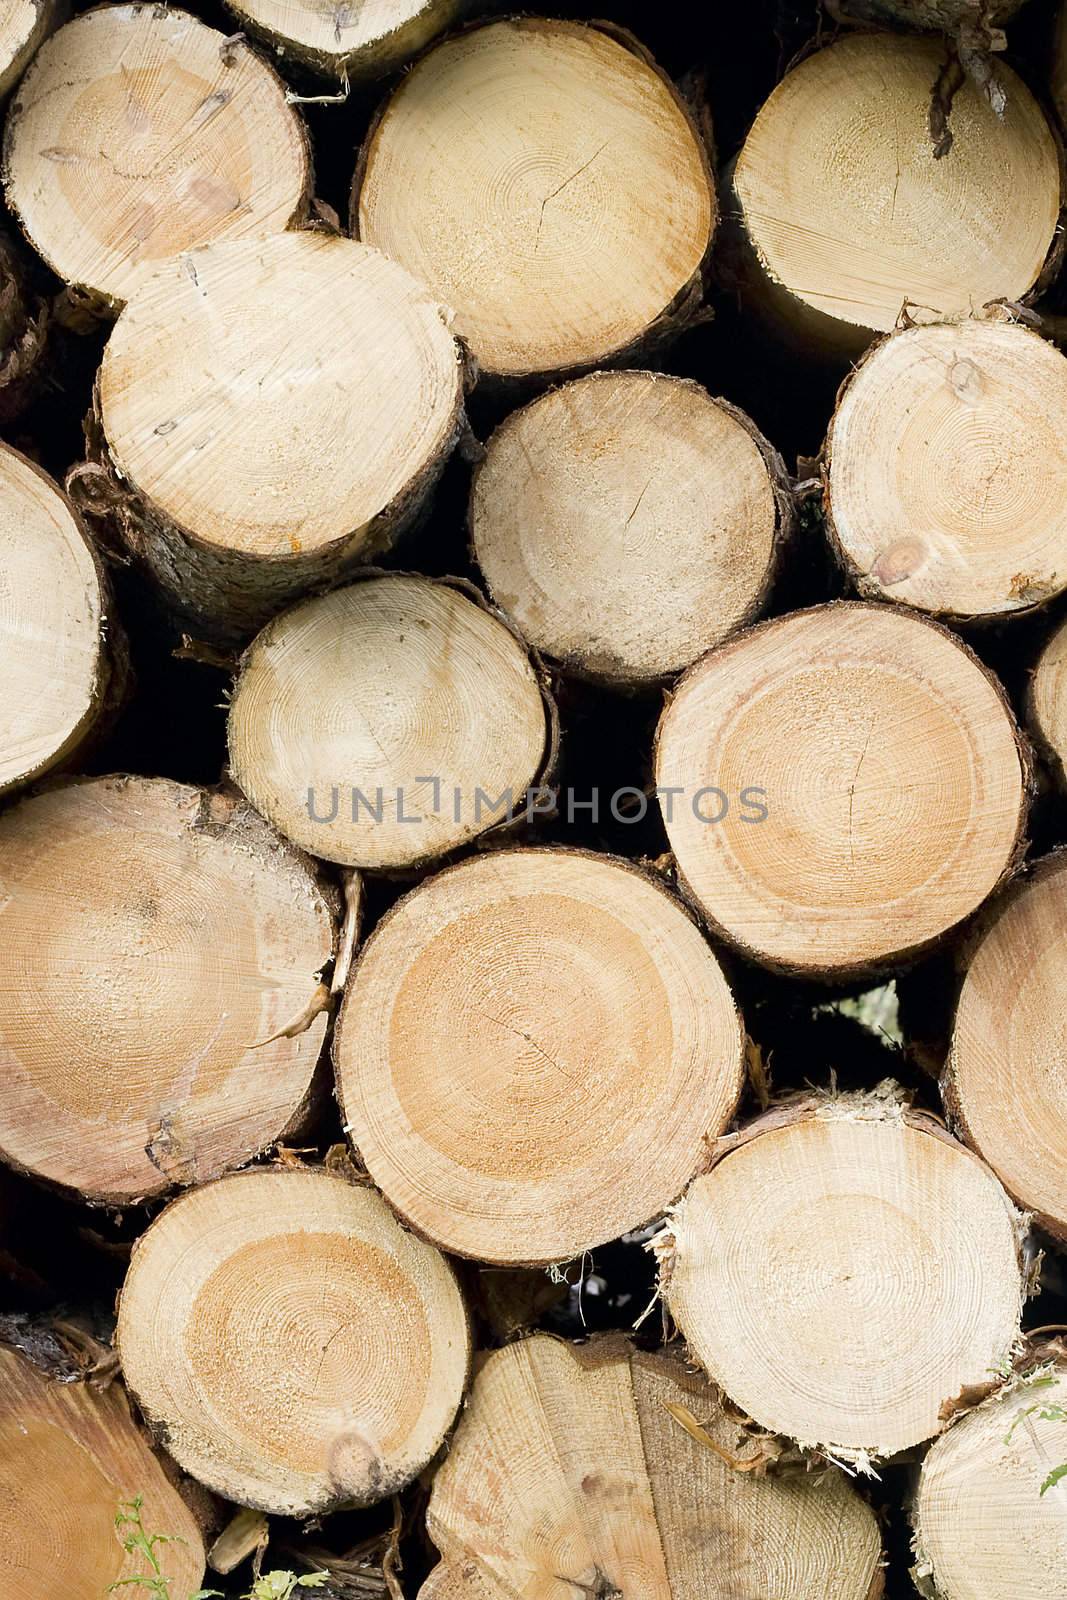 Pile of timber